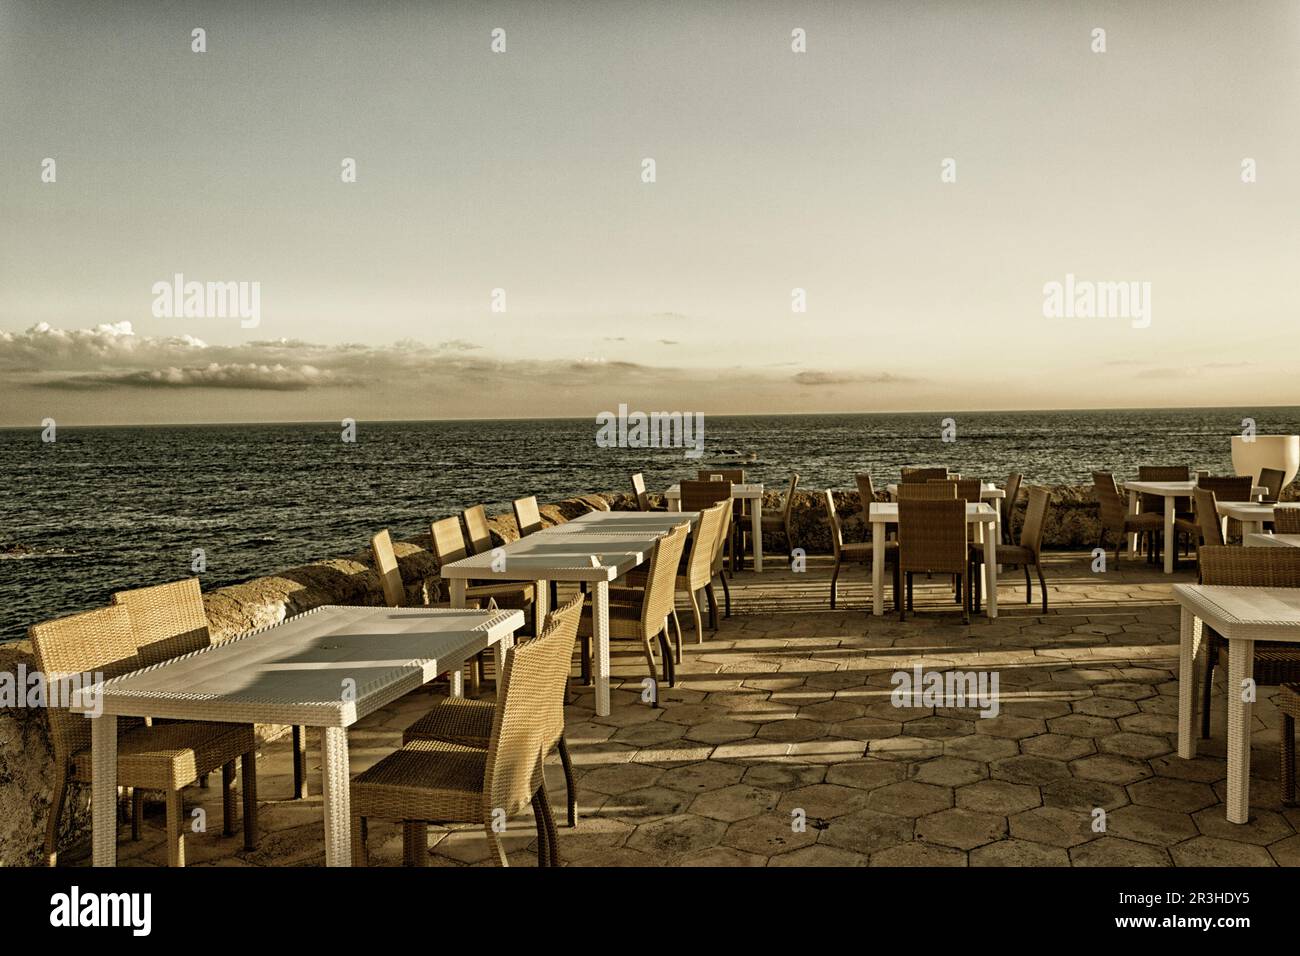 Restaurant on beach of the old town of Gallipoli (Le) Stock Photo